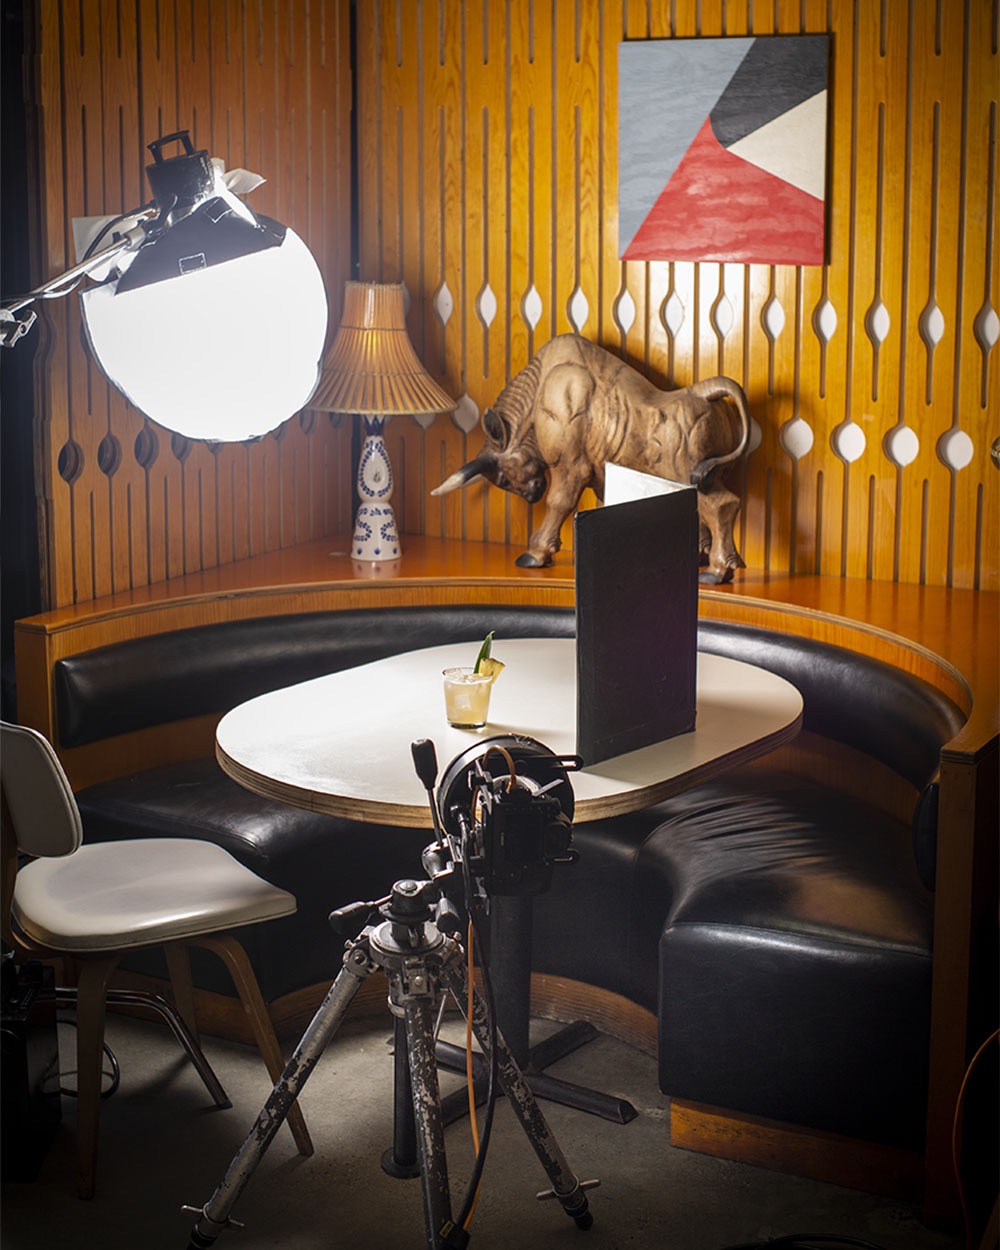 Behind the Scenes photograph of a cocktail being photographed.